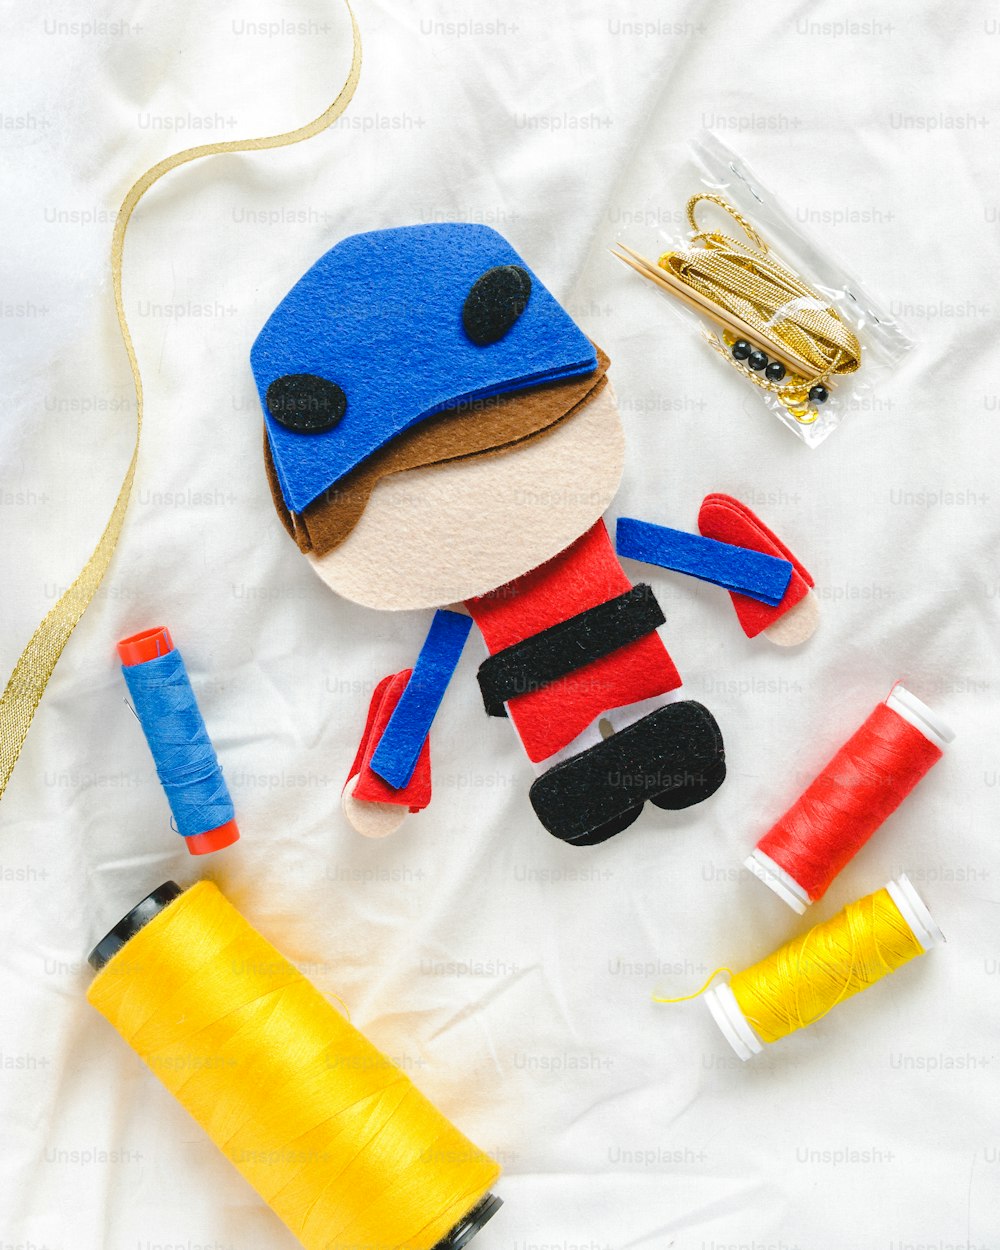 a toy with a blue hat and a yellow spool of thread